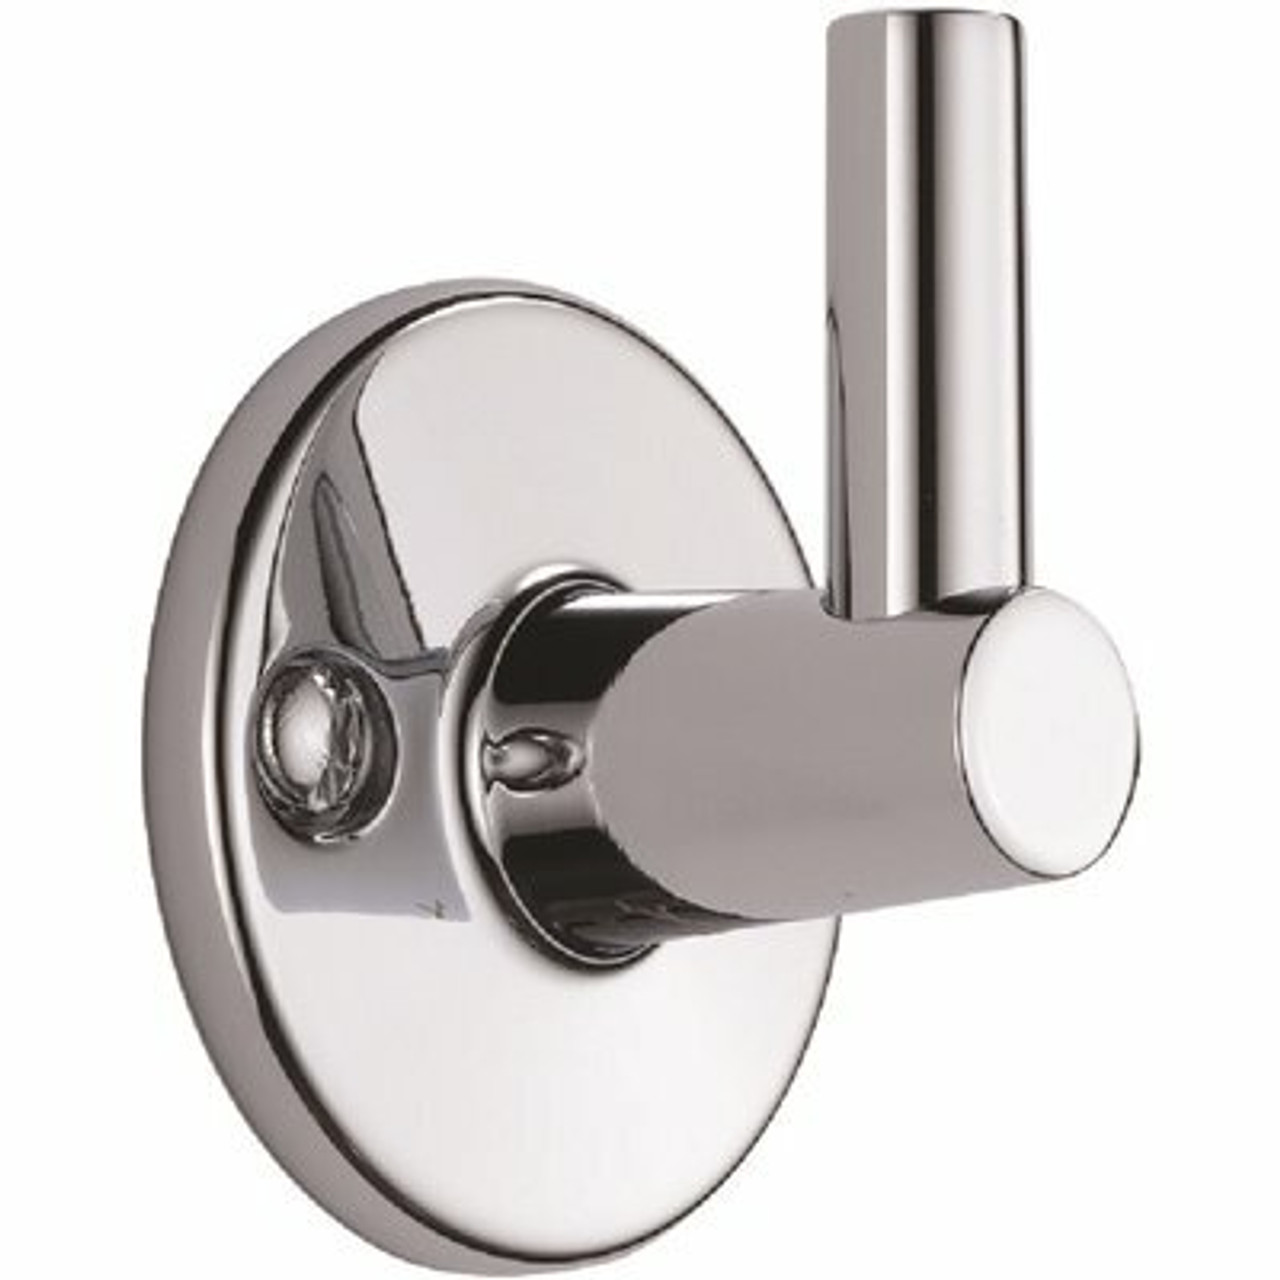 Delta All-Brass Pin Wall Mount For Hand Shower In Chrome